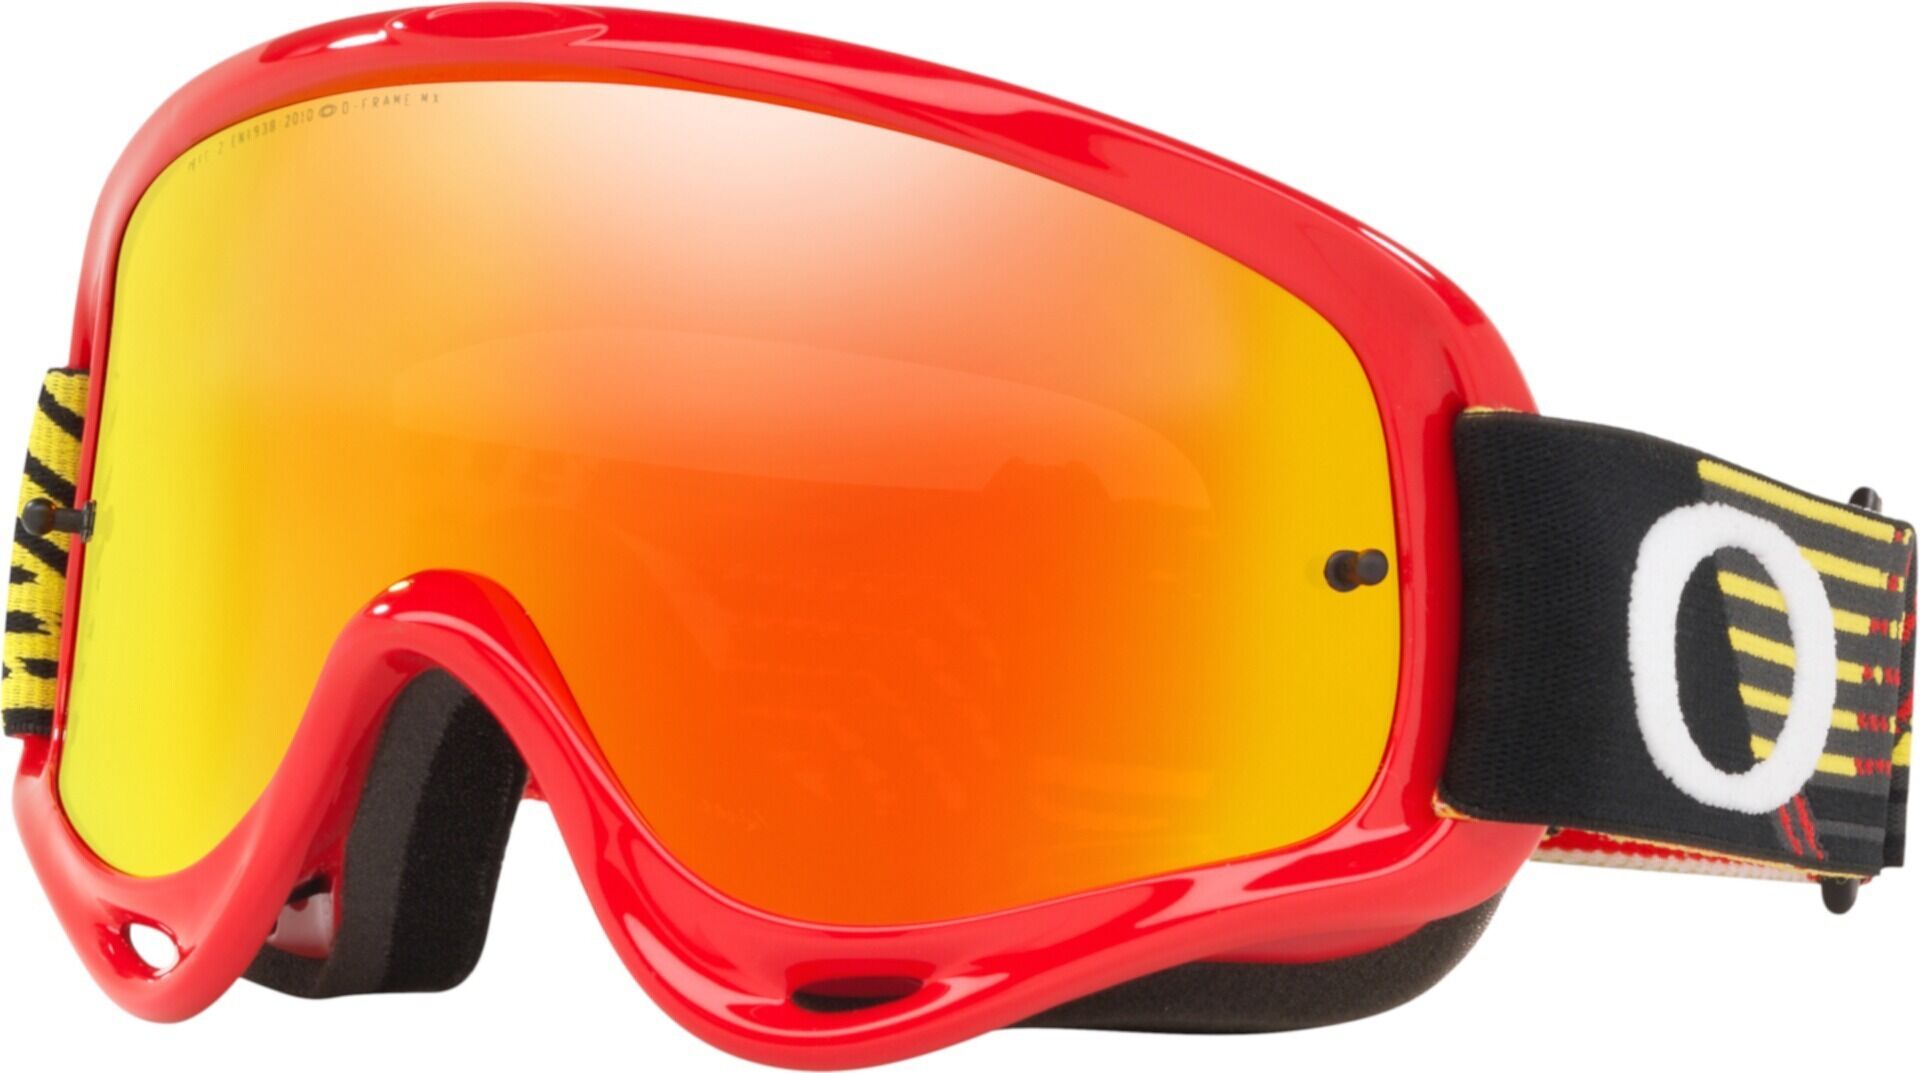 Oakley O-Frame Circuit Red Yellow Motocross Goggles  - Black